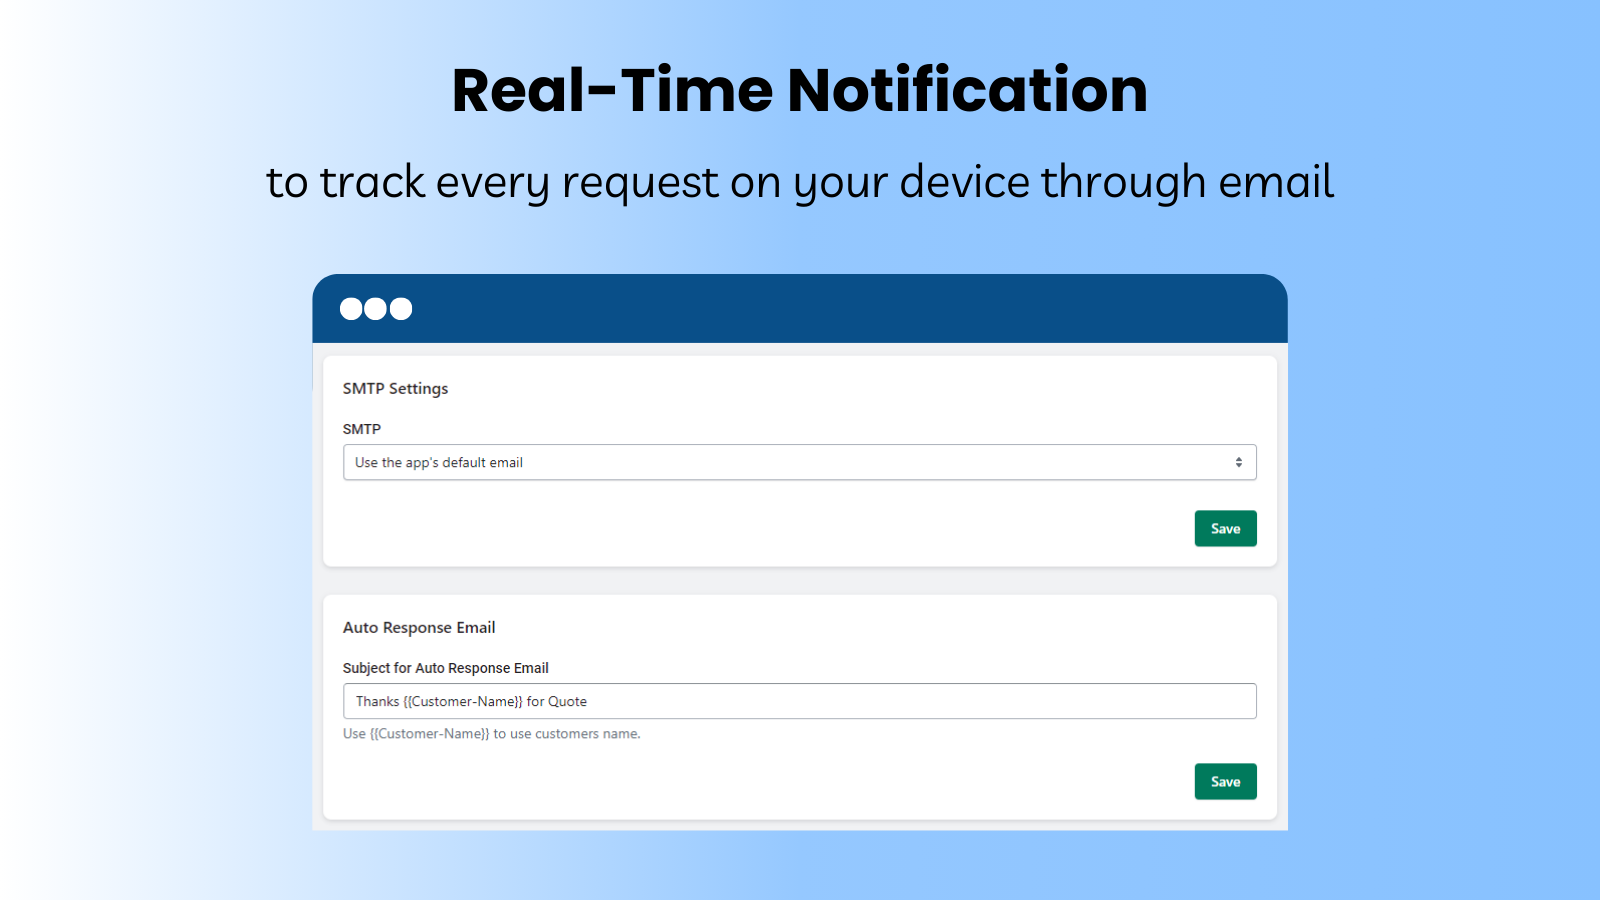 Real-time notification through email